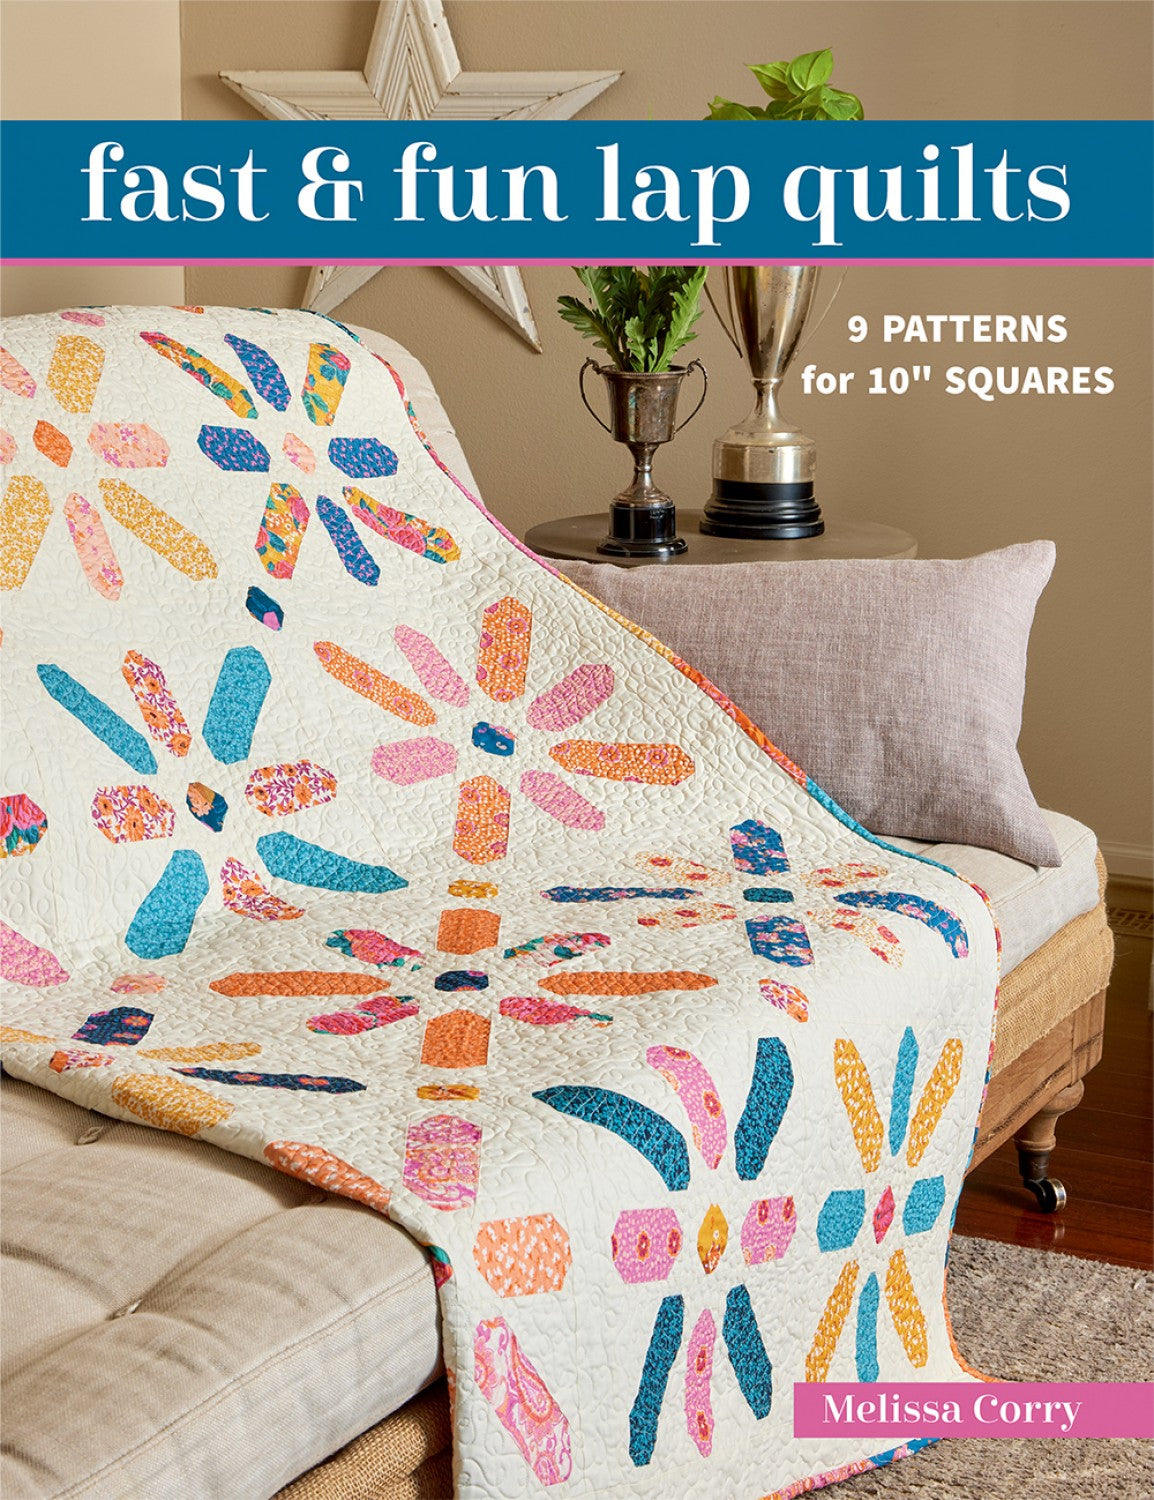 Fast and Fun Lap Quilts by Melissa Corry